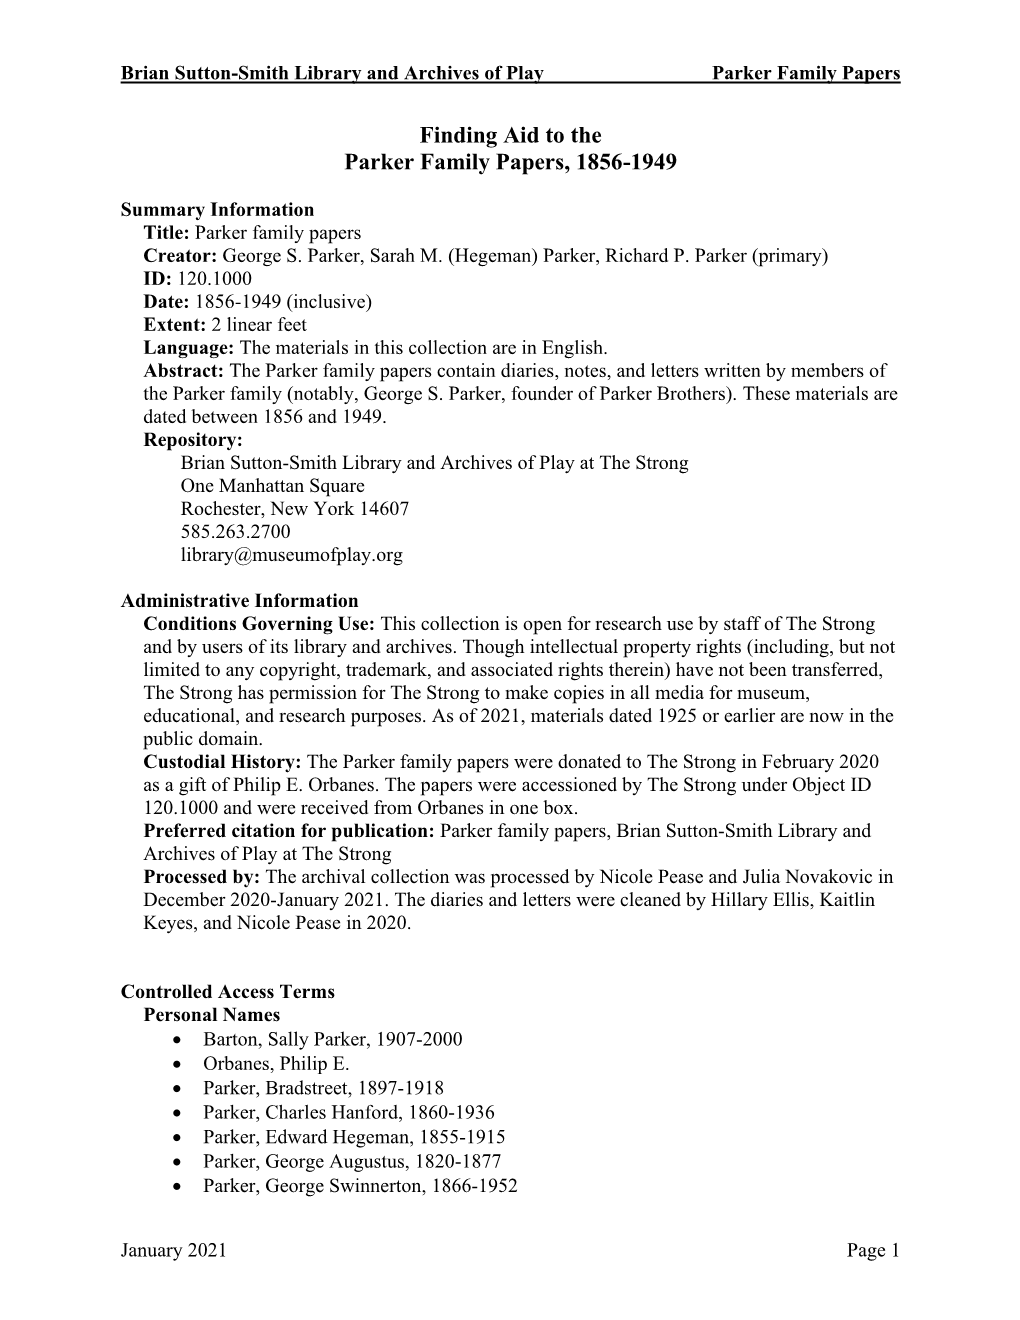 Finding Aid to the Parker Family Papers, 1856-1949